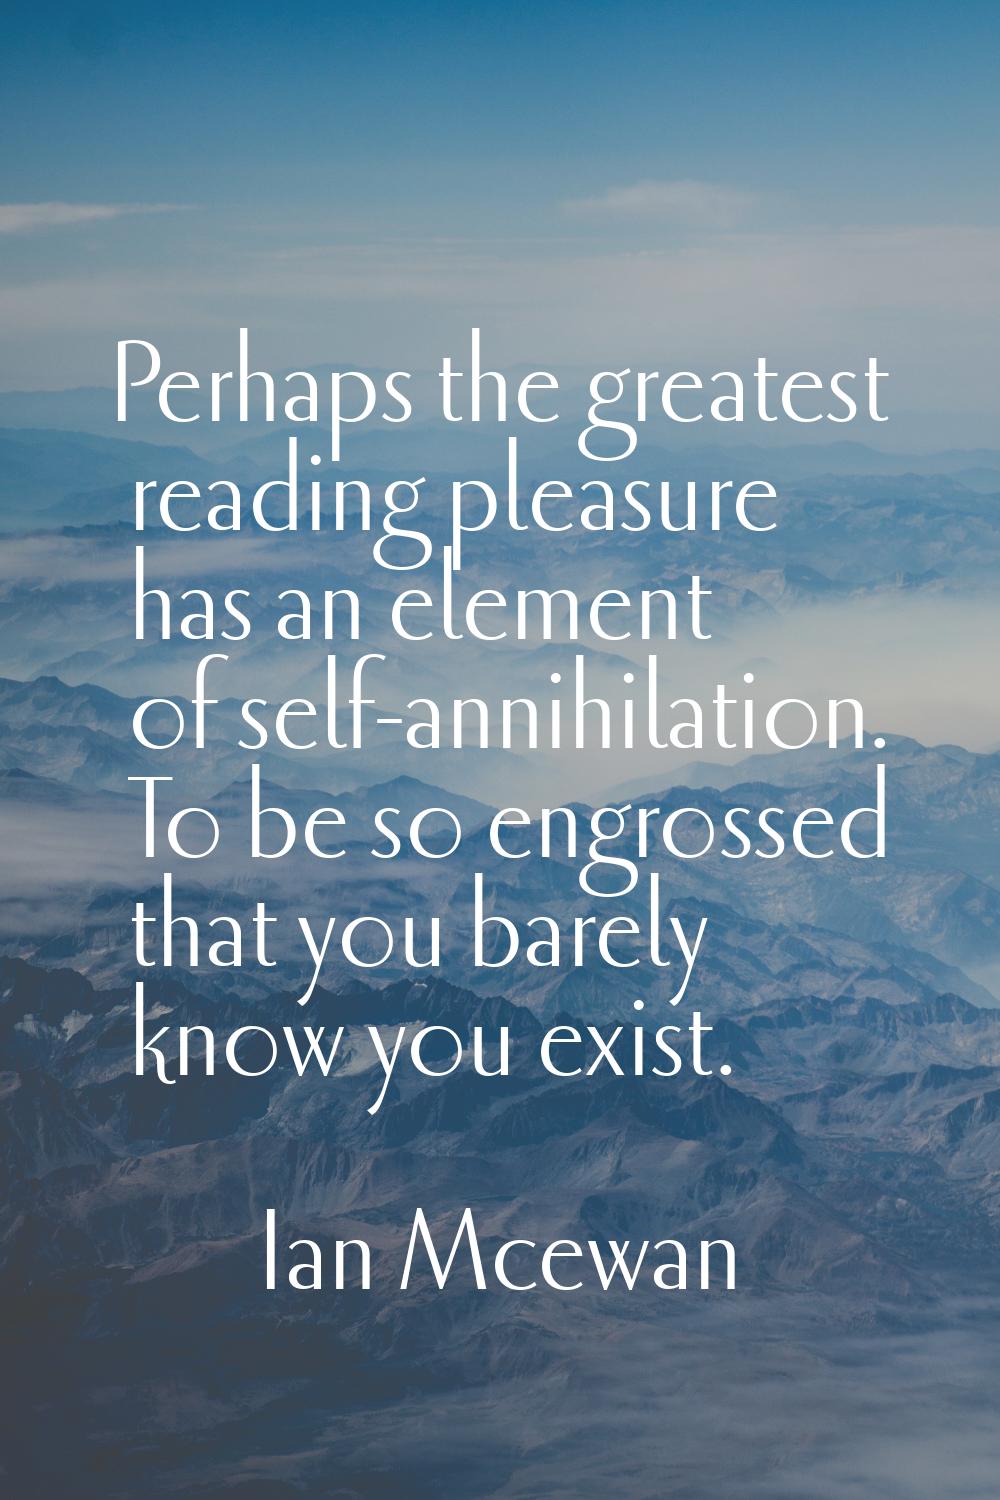 Perhaps the greatest reading pleasure has an element of self-annihilation. To be so engrossed that 